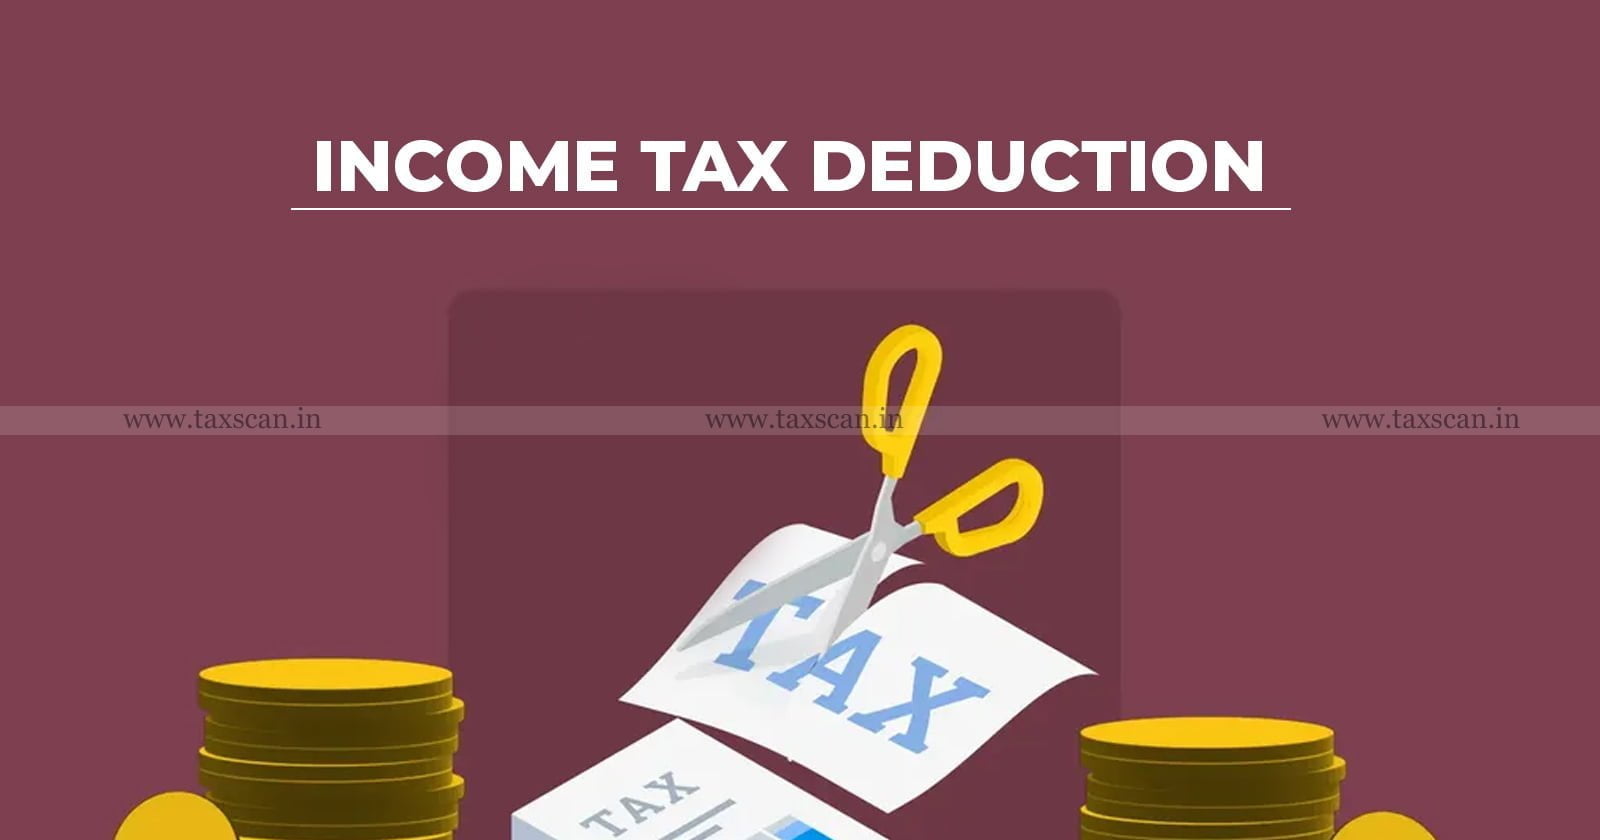 Activities - Import - Goods - Re - Export - Falls - Meaning - Services - SEZ - Act - ITAT - Income - Tax - Deduction - TAXSCAN